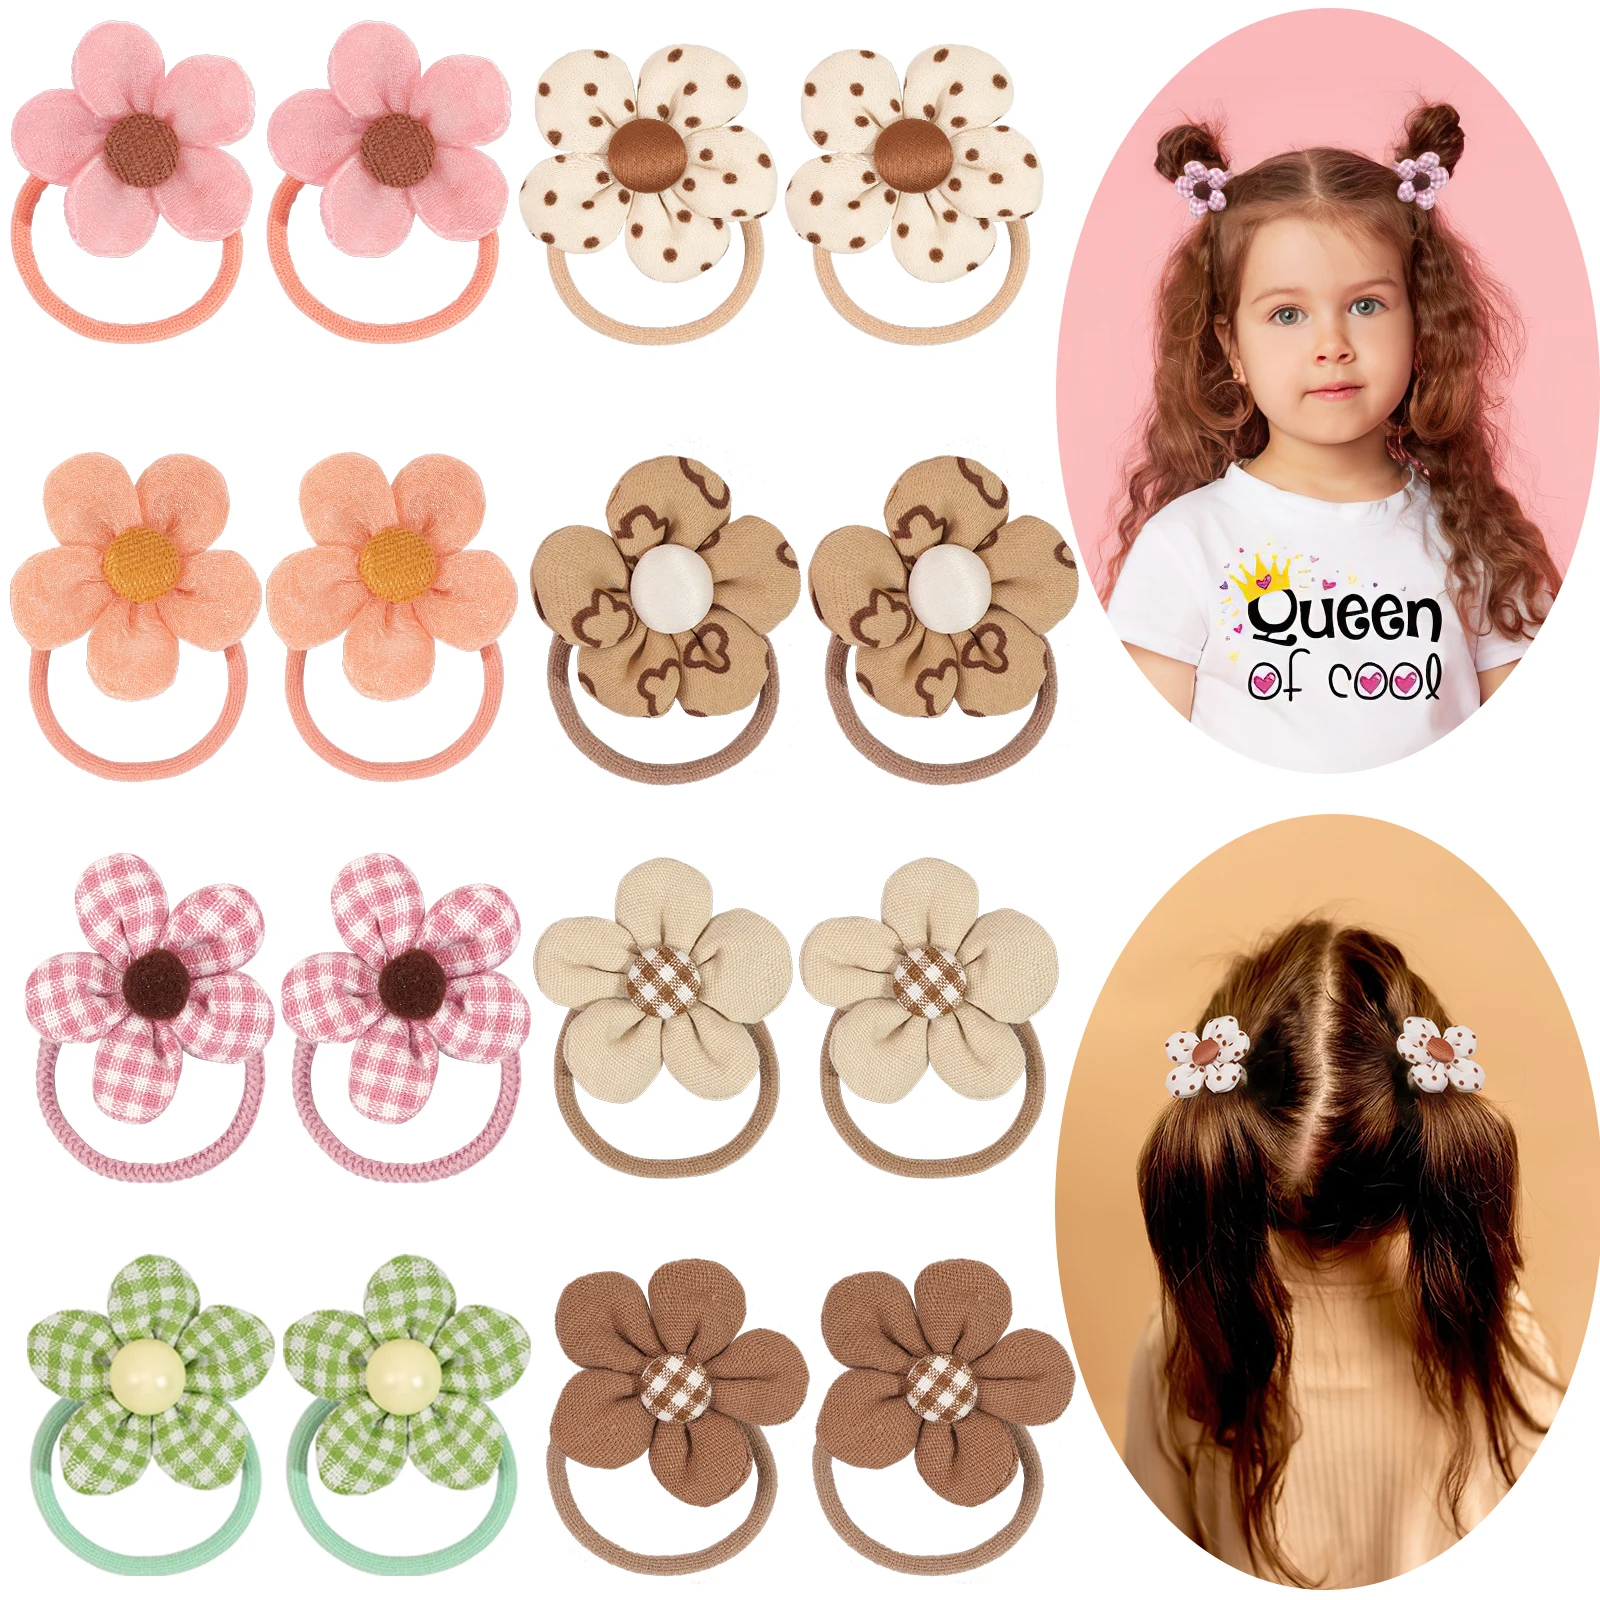 

8Pcs Boutique childrens Hair Ties with Flowers, Hair Bow Ties for Toddler Girls, Elastics Ponytail Holders Pigtails Rubber Band